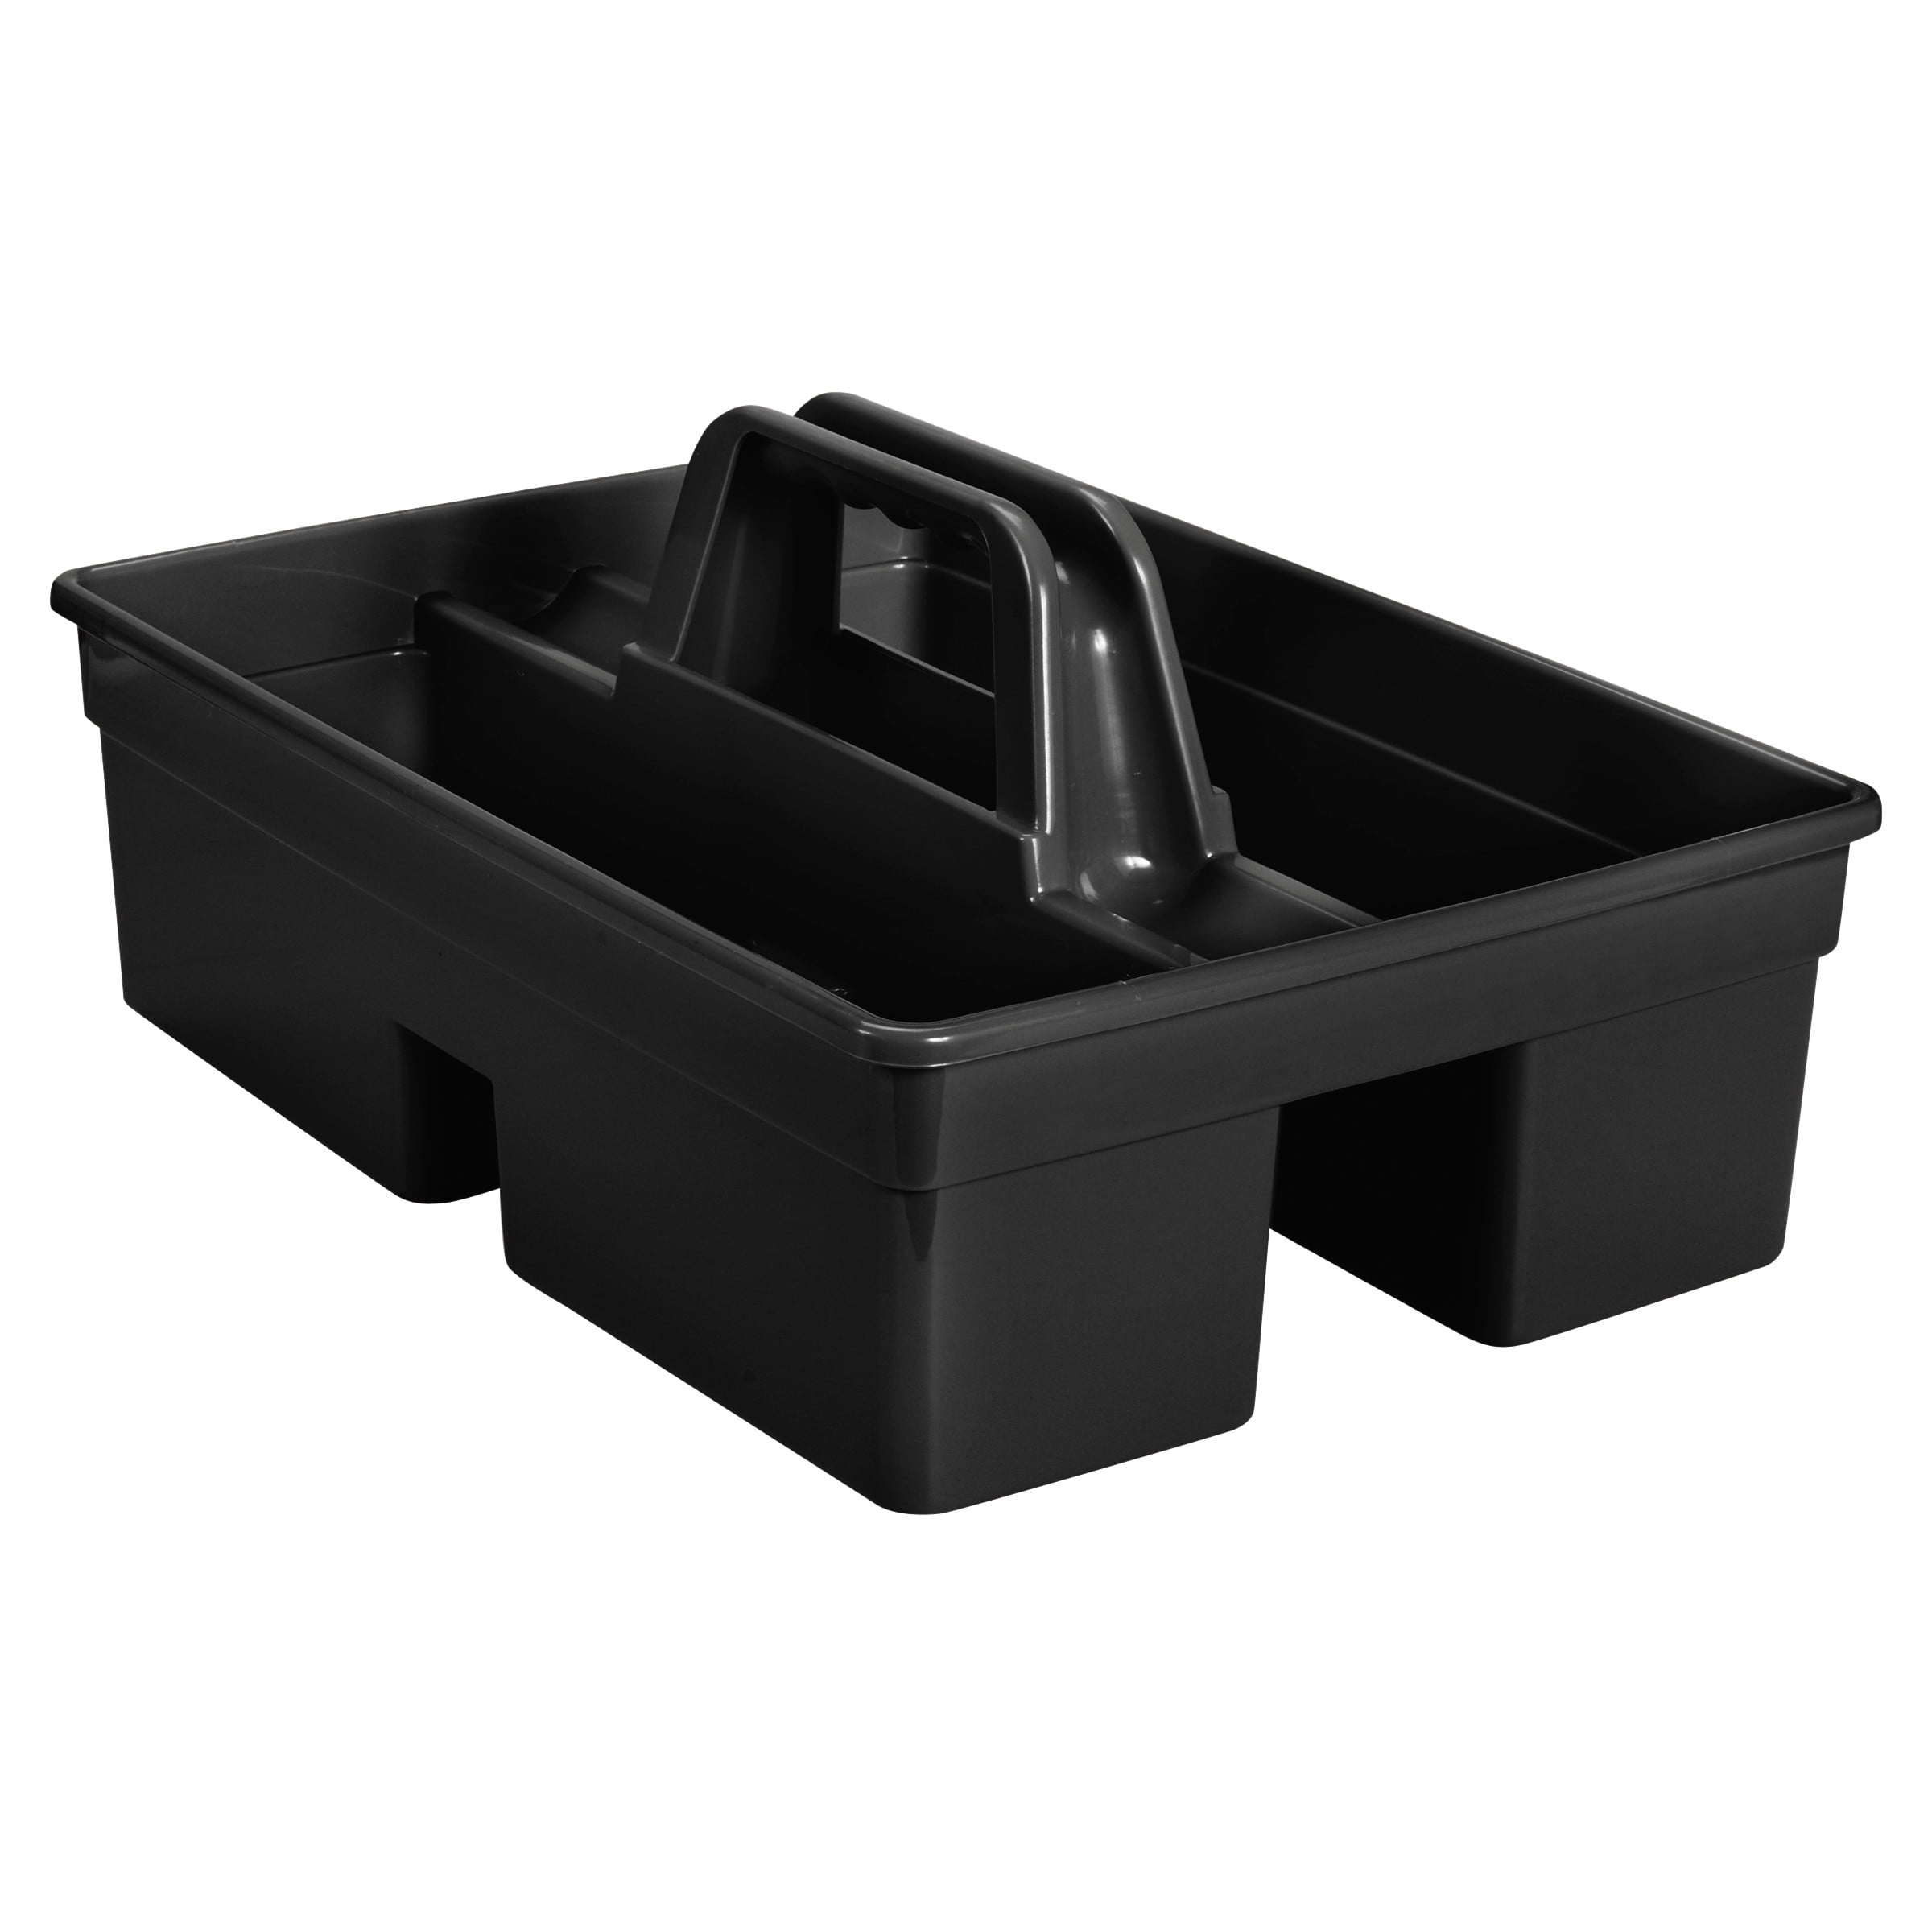 Rubbermaid Commercial Products 2147582 Rubbermaid